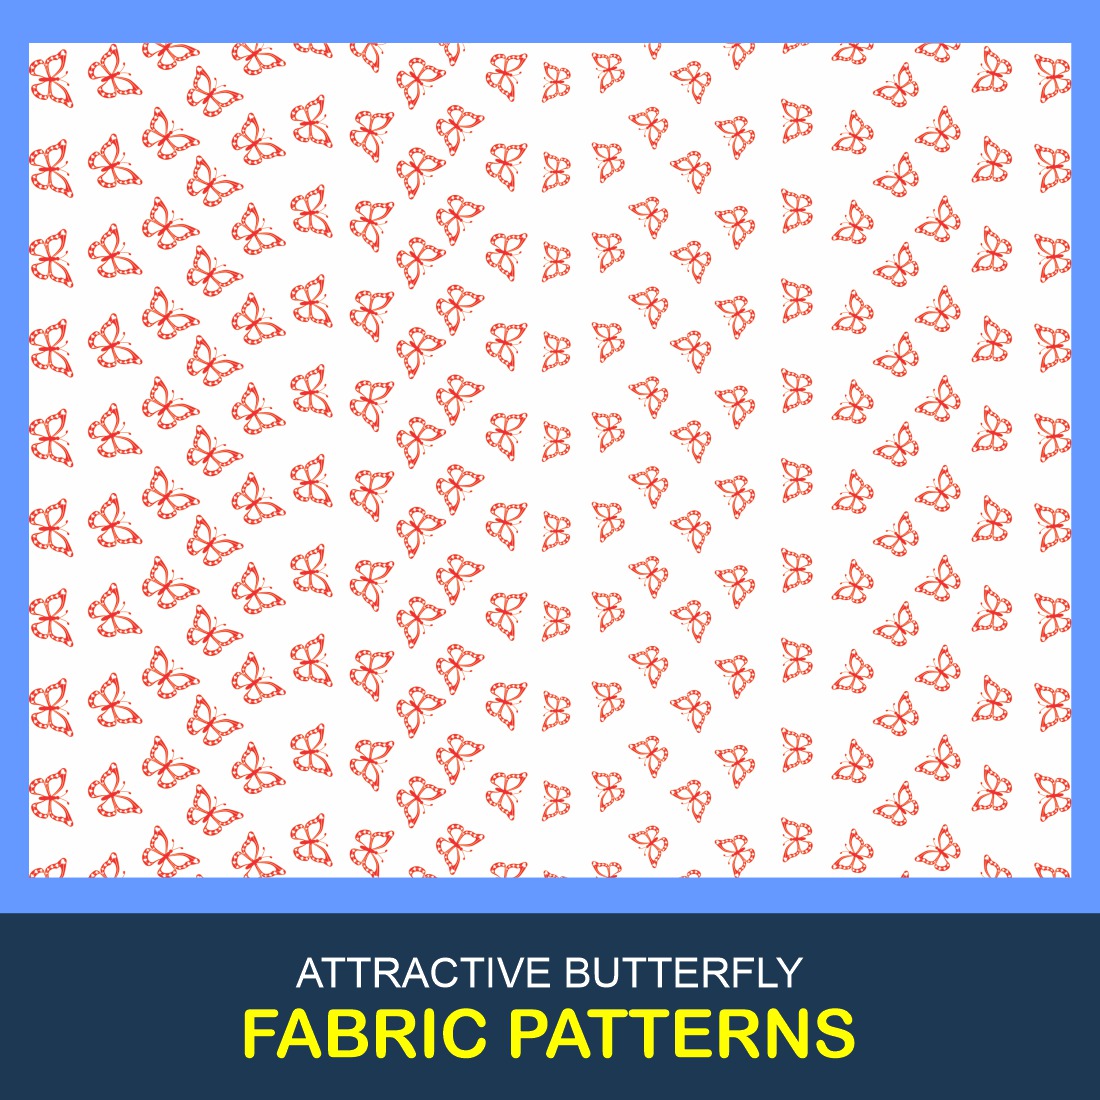 6 Elegant Butterfly Fabric Pattern Collections cover image.